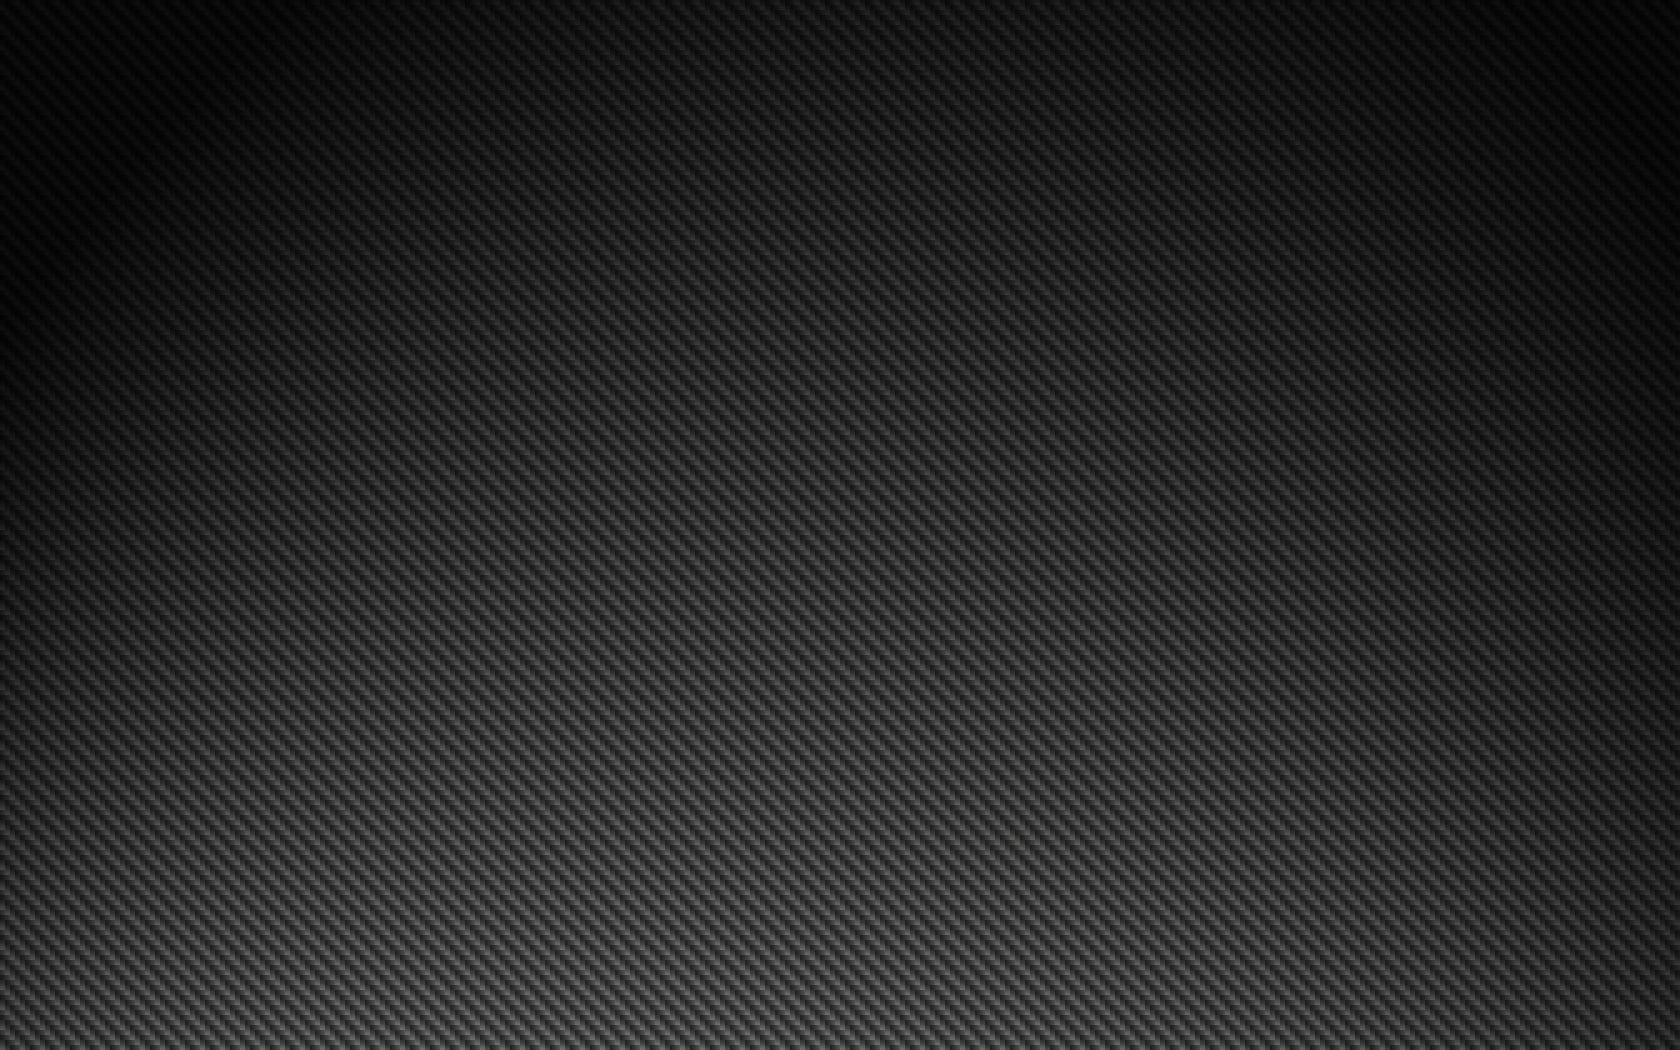 carbon fiber, texture, backgrounds, pattern, textured, no people